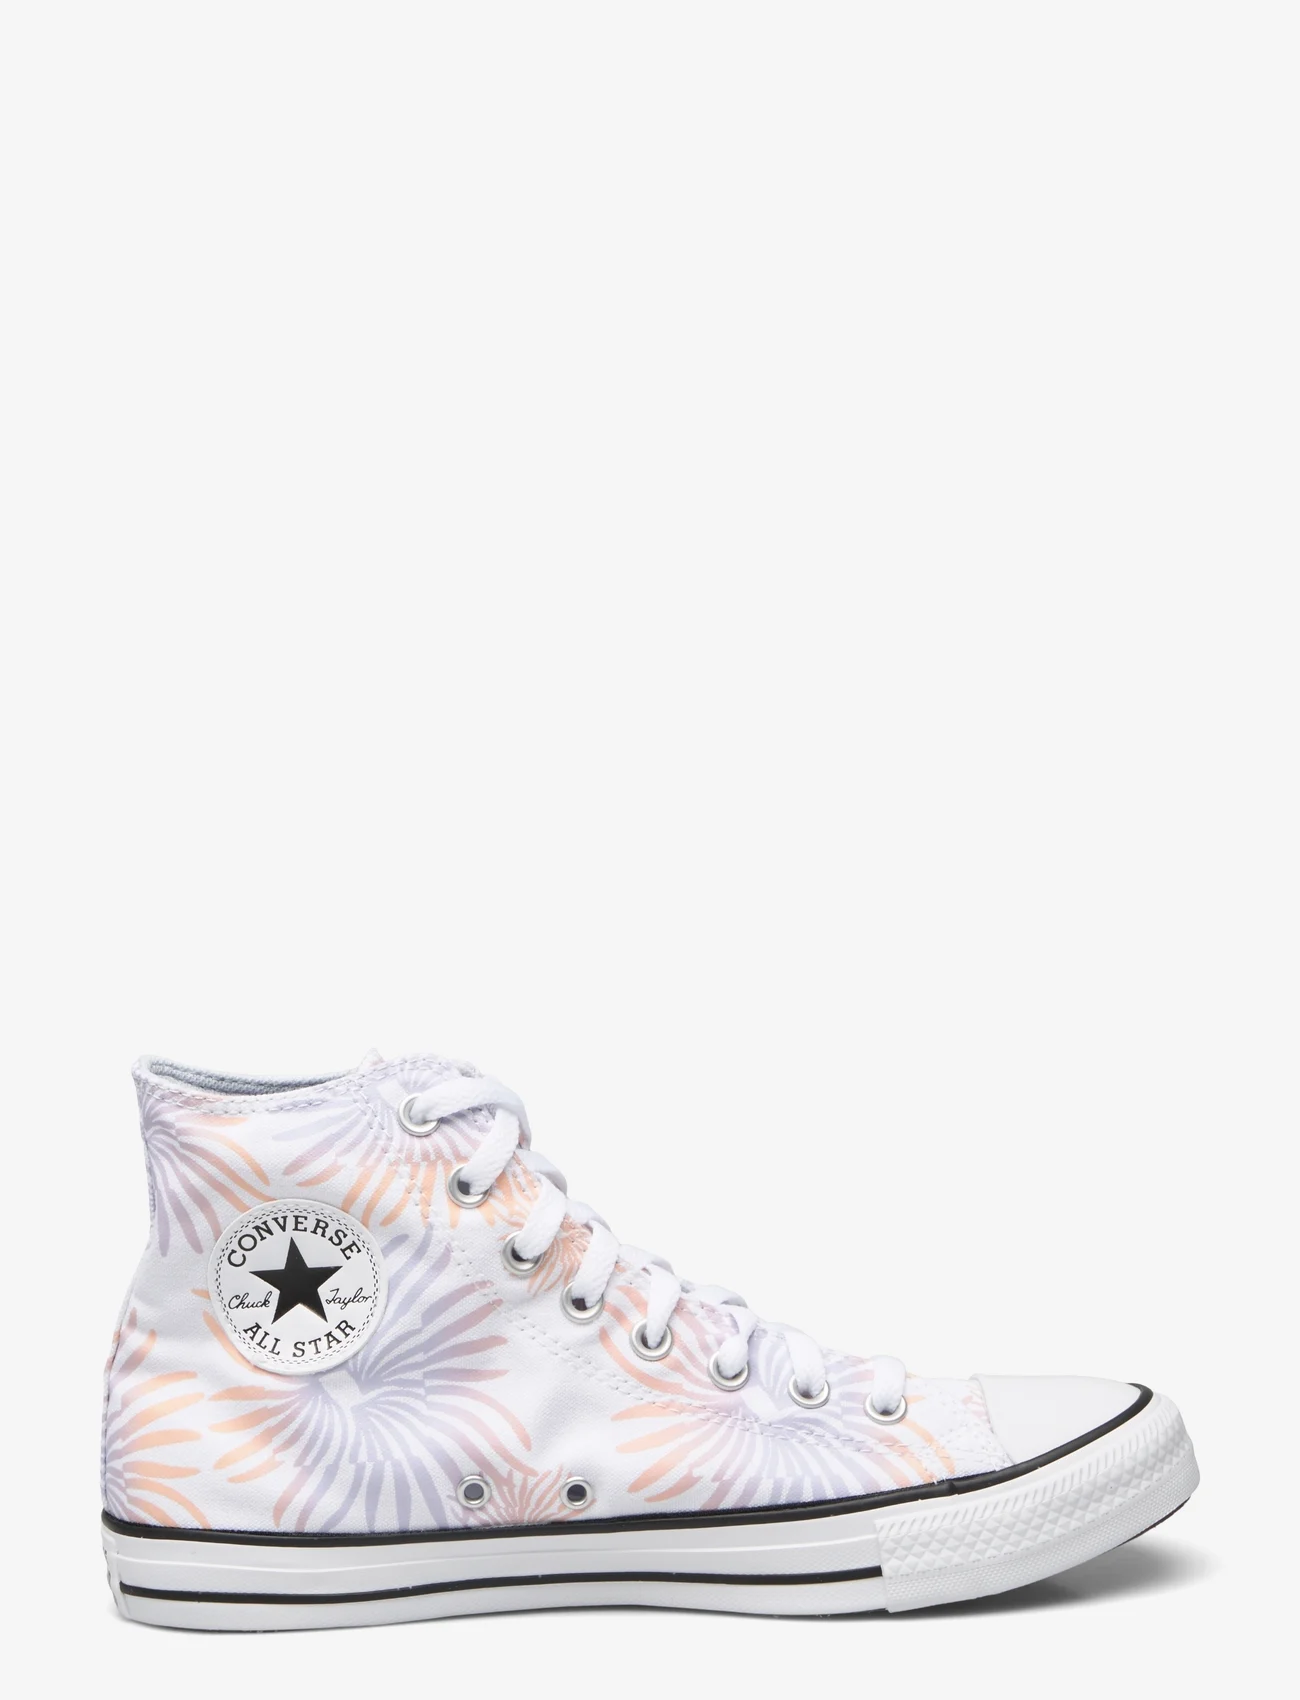 boozt.com | Chuck Taylor All Star high-top sneakers